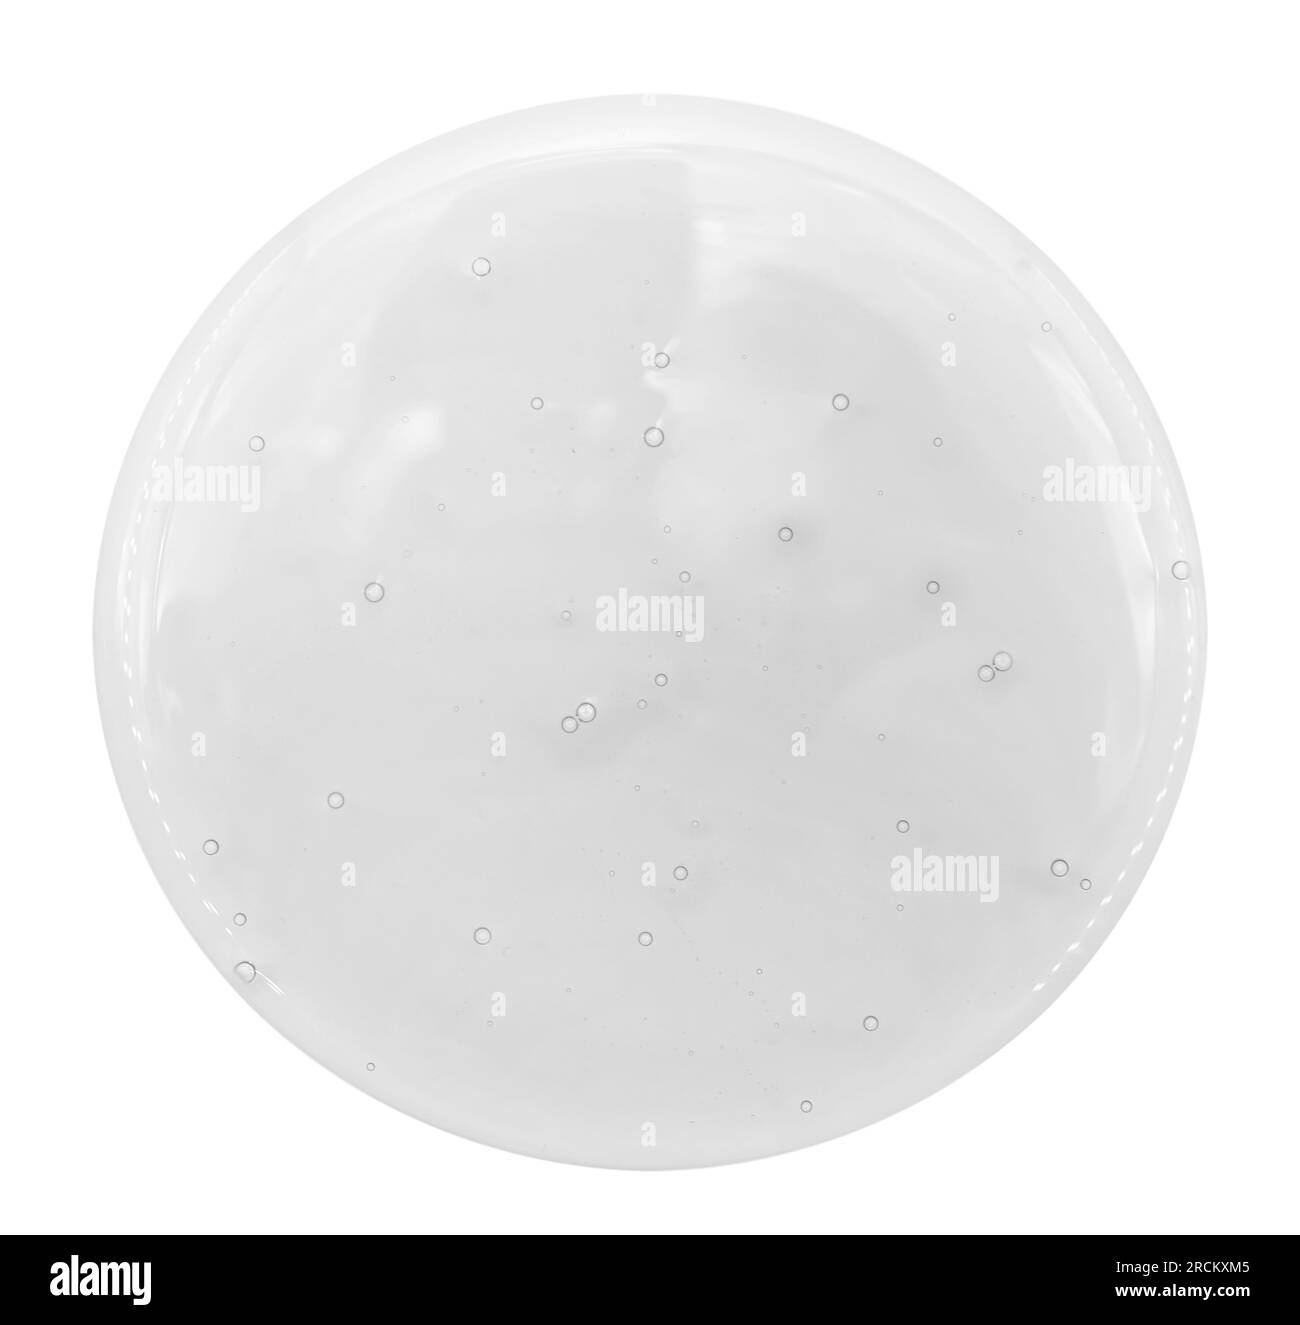 Soap foam round shape on a white background. Shampoo or detergent drop isolate Stock Photo